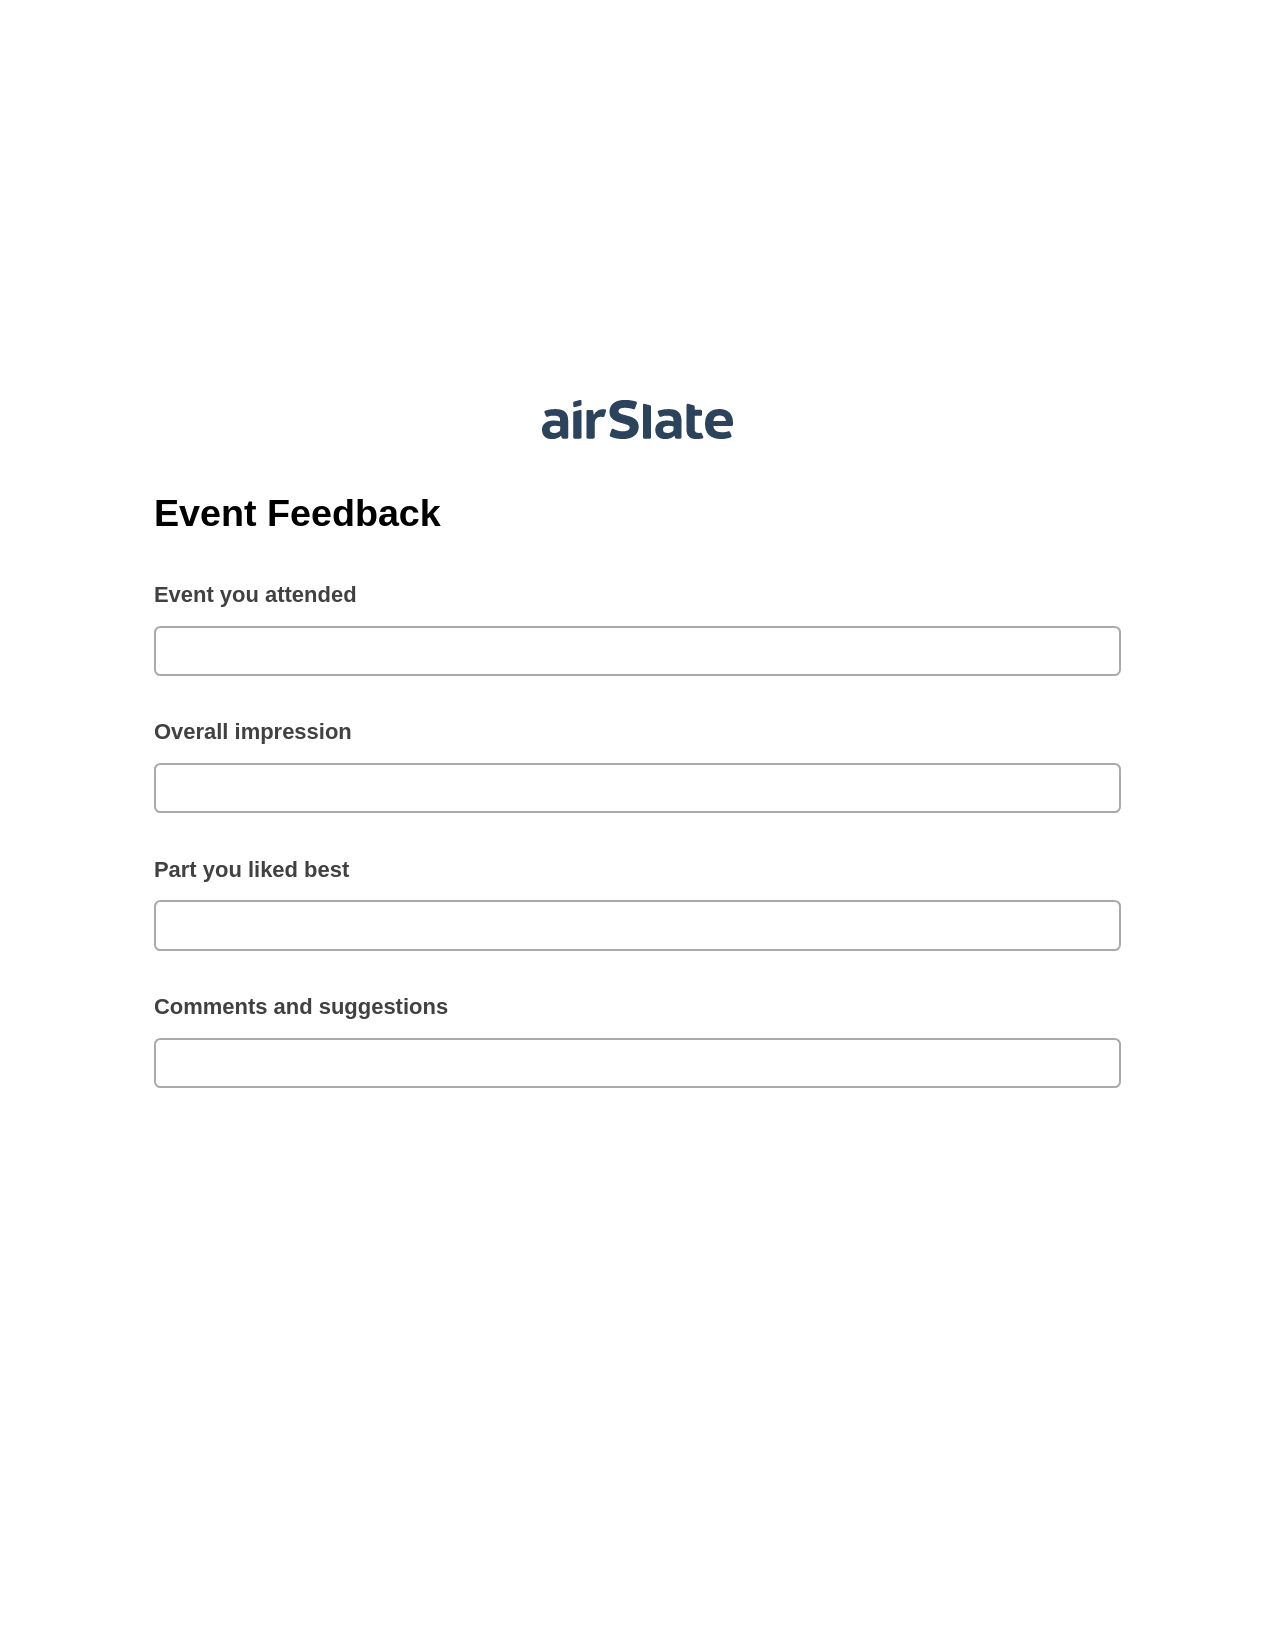 Event Feedback Pre-fill Dropdown from Airtable, SendGrid send Campaign bot, Export to Salesforce Bot